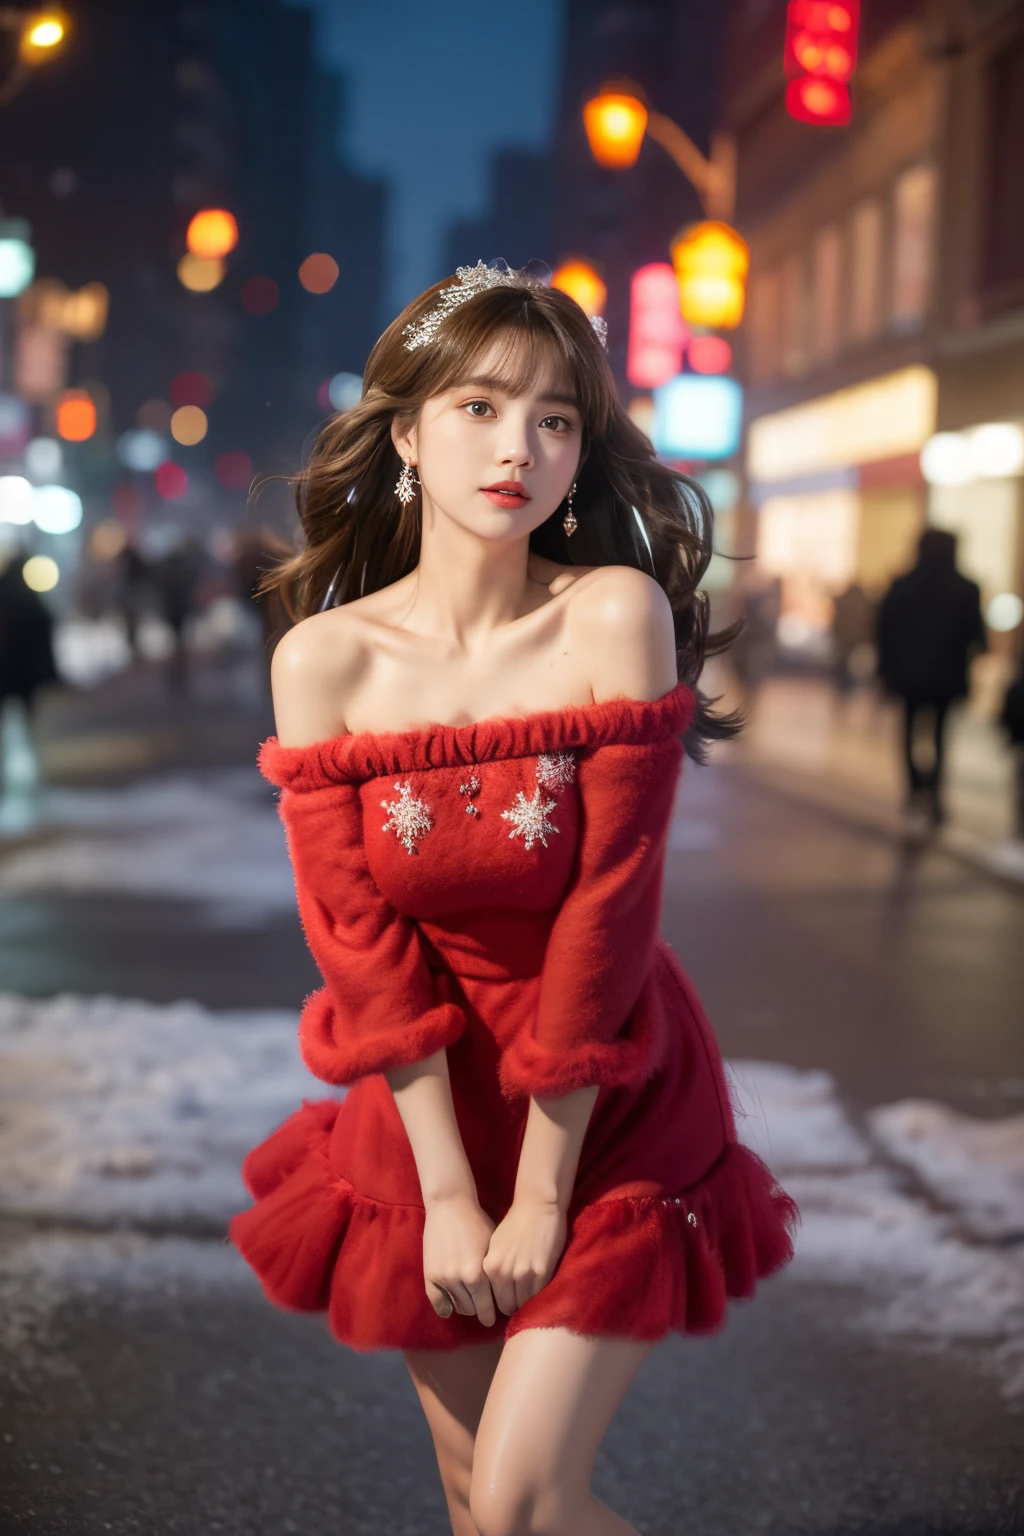 8K，tmasterpiece、quality、ultra - detailed、Master workarilyn Takiocus located on thighs and above，Clear face，（Best quality at best）， beuaty girl：1.5、((Red fluffy off-shoulder dress style))，long hair fluttering，Snowflake earrings、snowflakes falling、bblurry、the street，